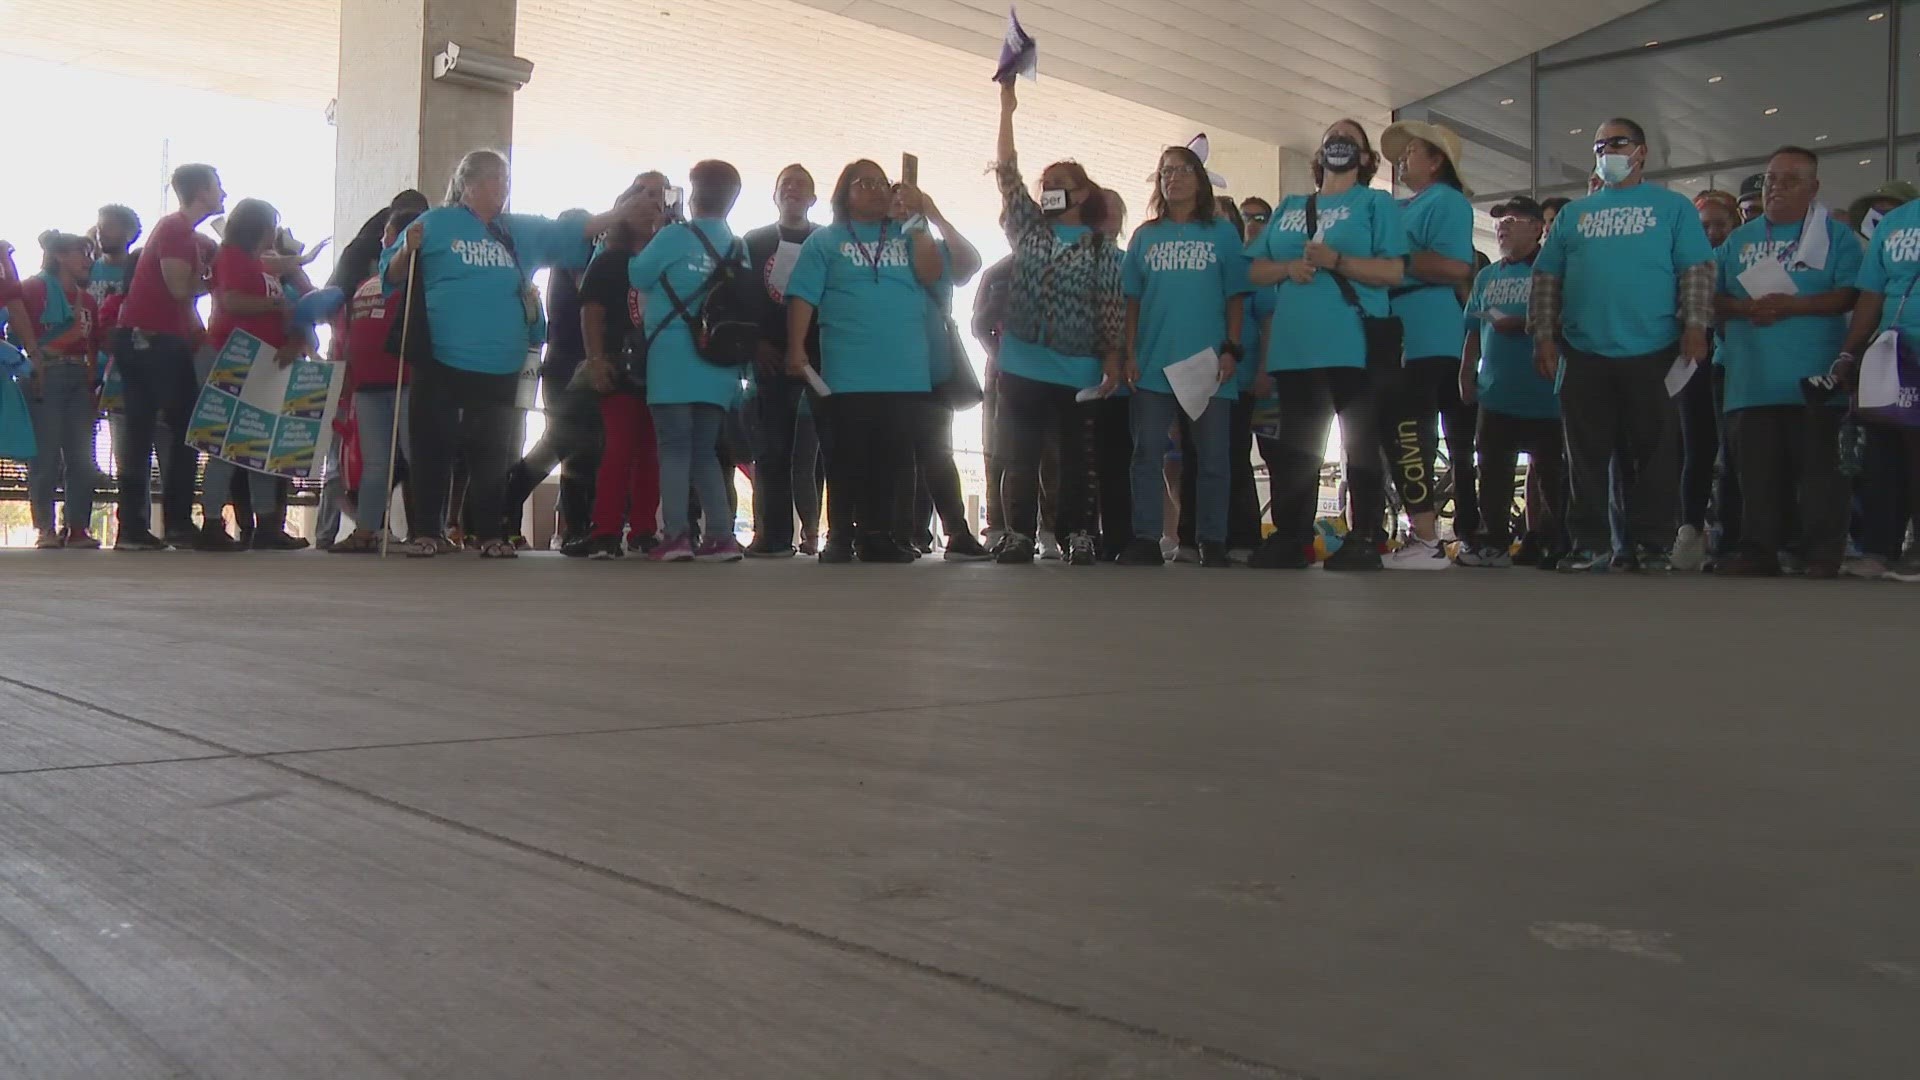 Workers say they've done too much for too long. The airport workers want this year's FAA reauthorization bill to include provisions for healthcare, PTO and more.